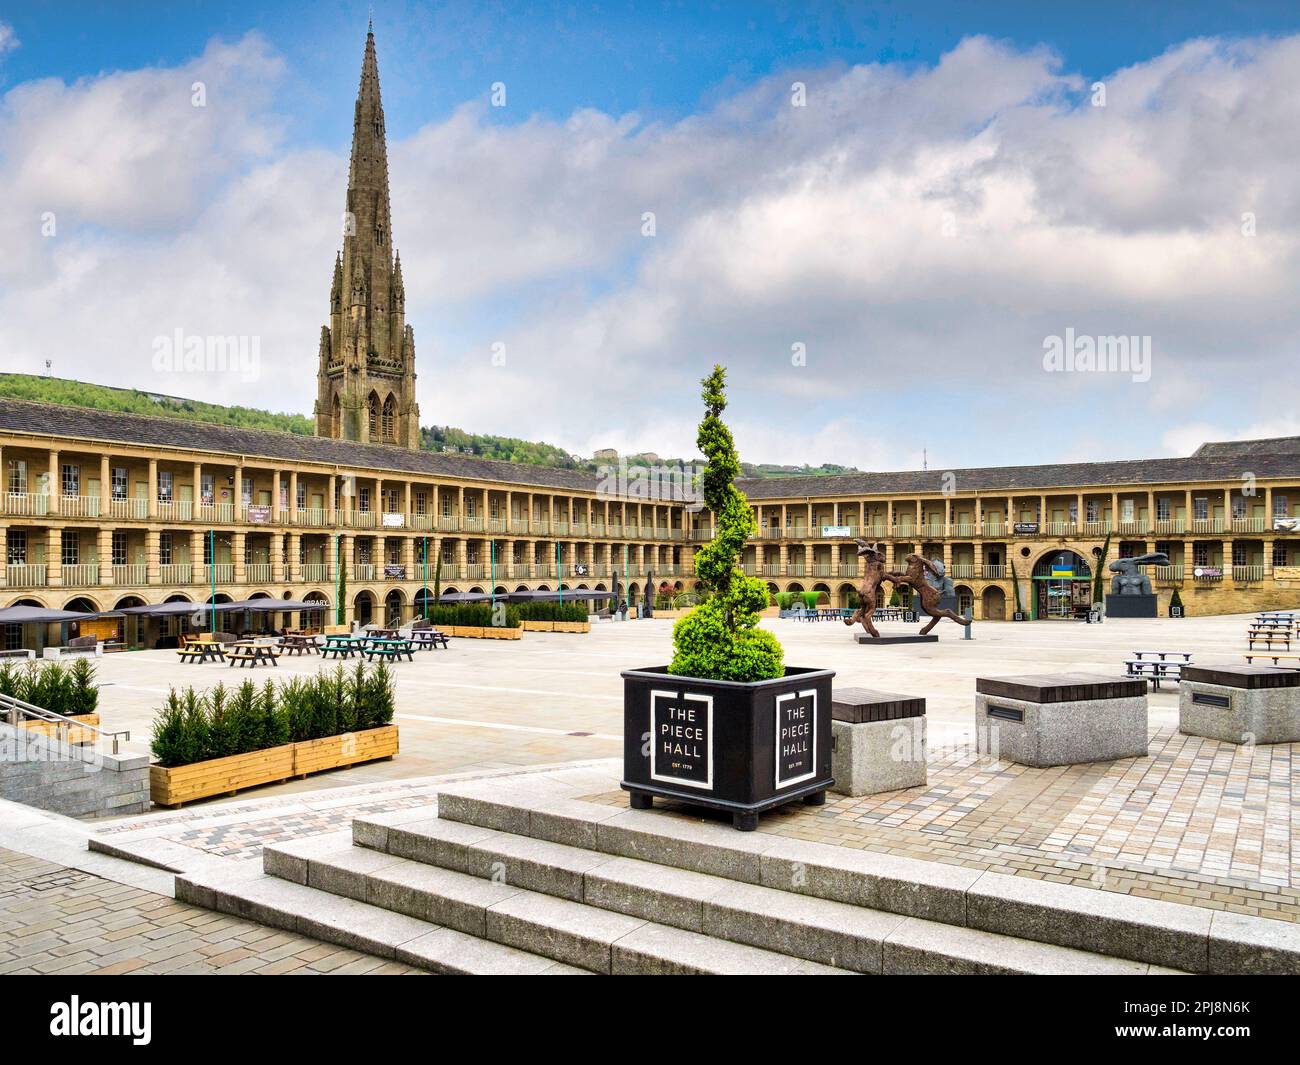 28 April 2022: Halifax, West Yorkshire, UK - The courtyard of the Piece Hall, opened in 1779 as a marketplace for local weavers, and a Grade I Listed Stock Photo